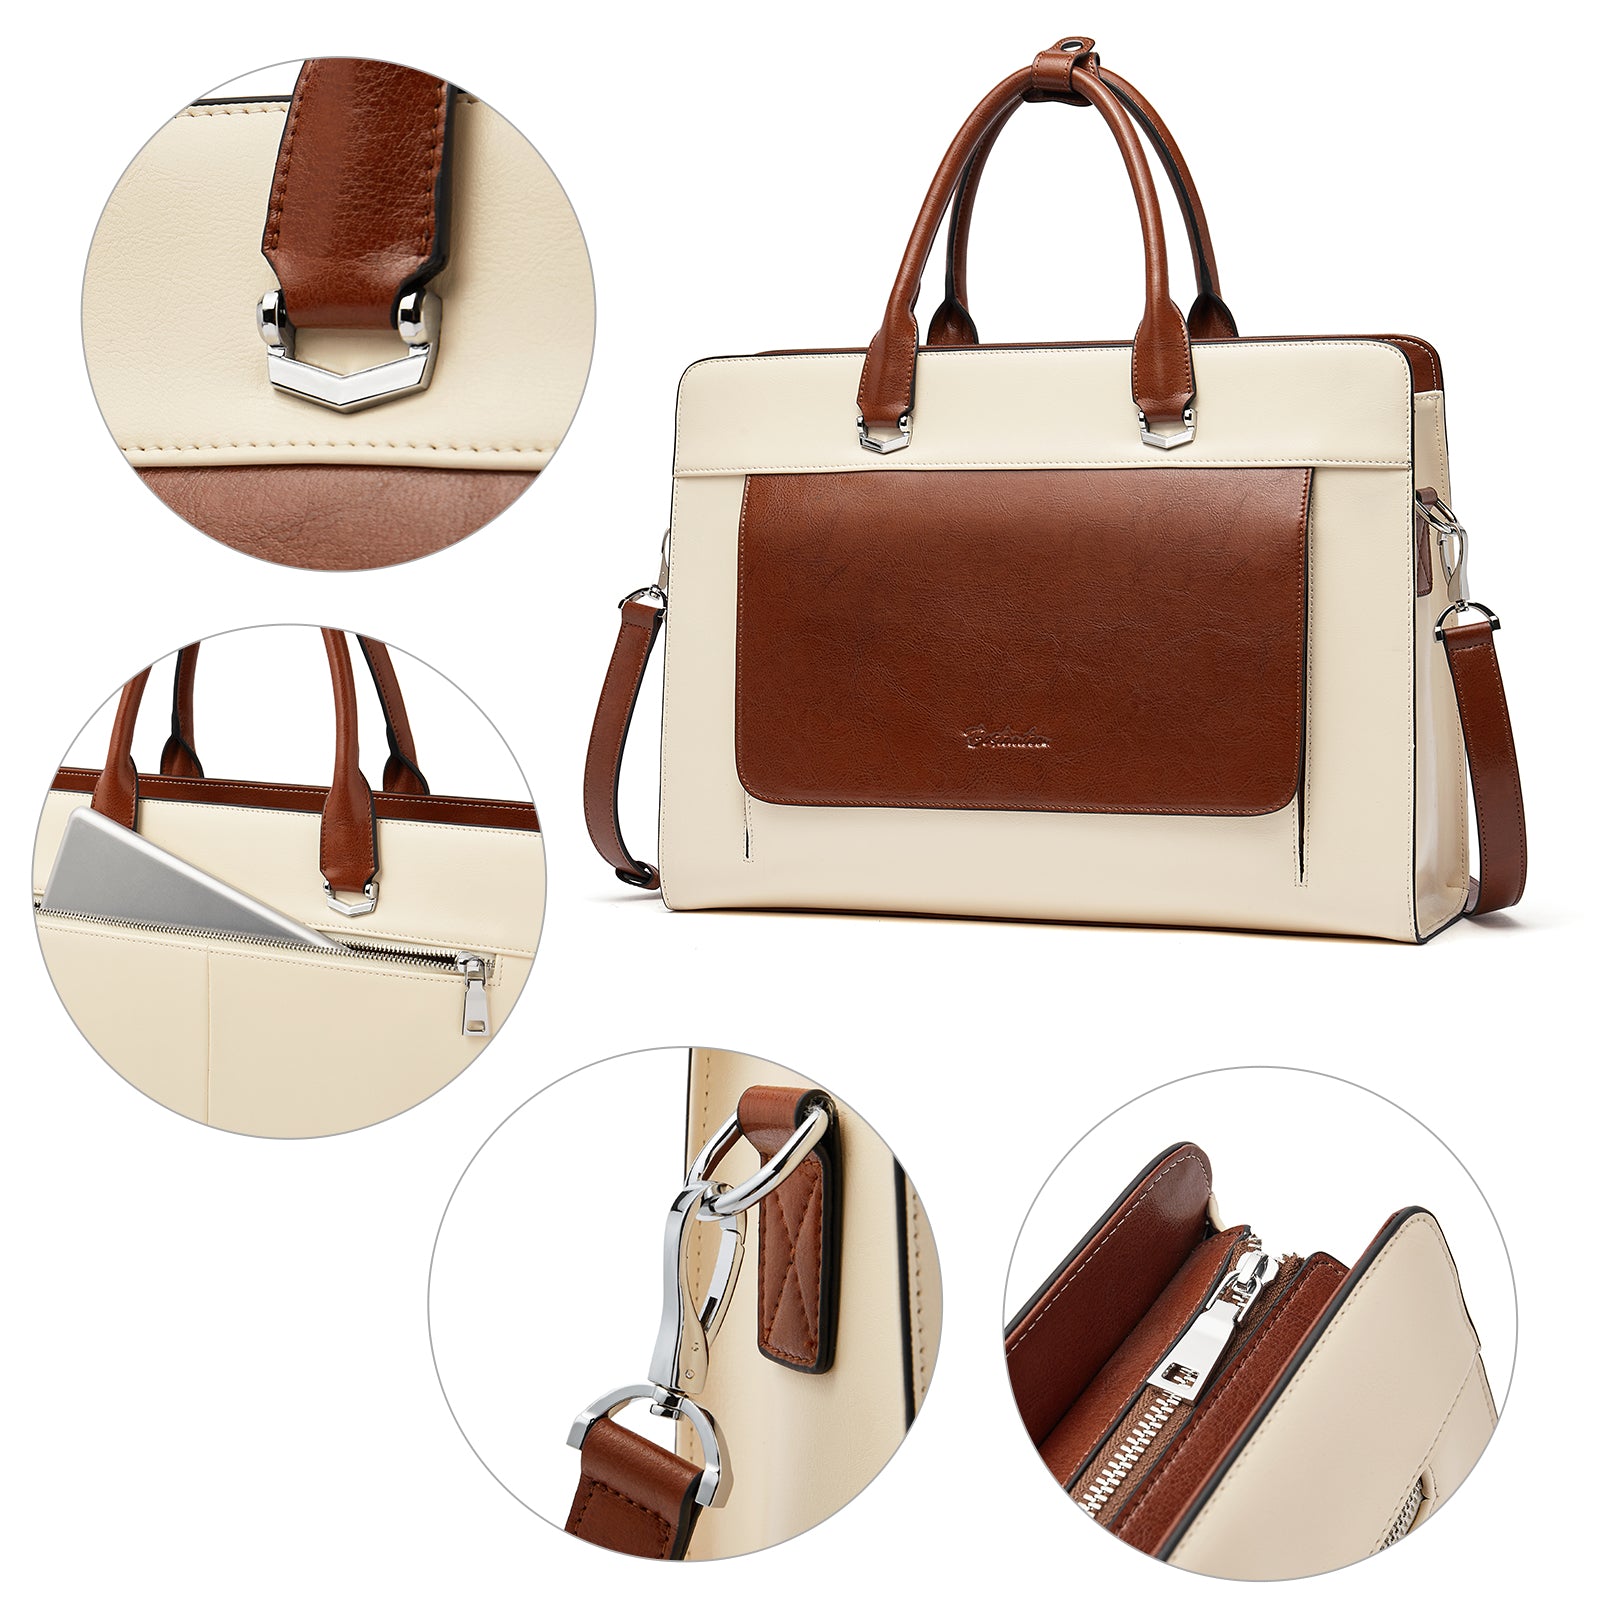 BROMEN Laptop Tote Bag 15.6 inch Briefcases for Women Stylish Business  Office Work Tote Bag Color - brown